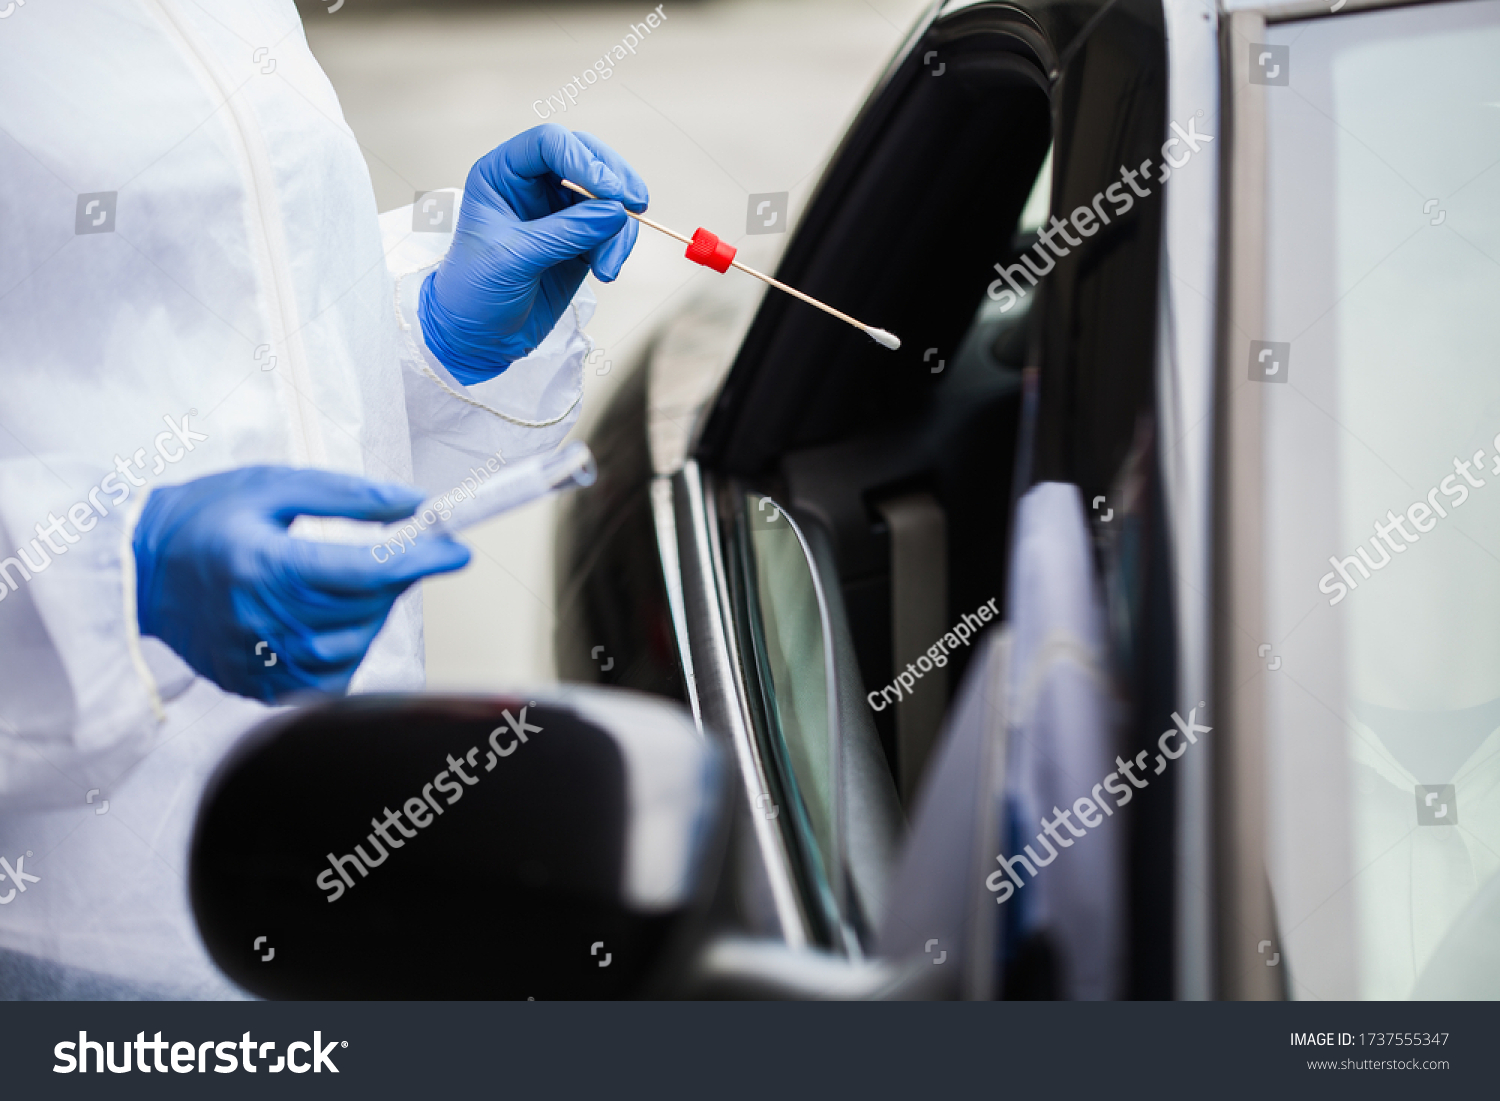 Medical worker in N95 PPE performing nasal throat swab on person in vehicle through car window,COVID-19 UK mobile testing centre drive thru facility,hands closeup in blue gloves holding test kit #1737555347